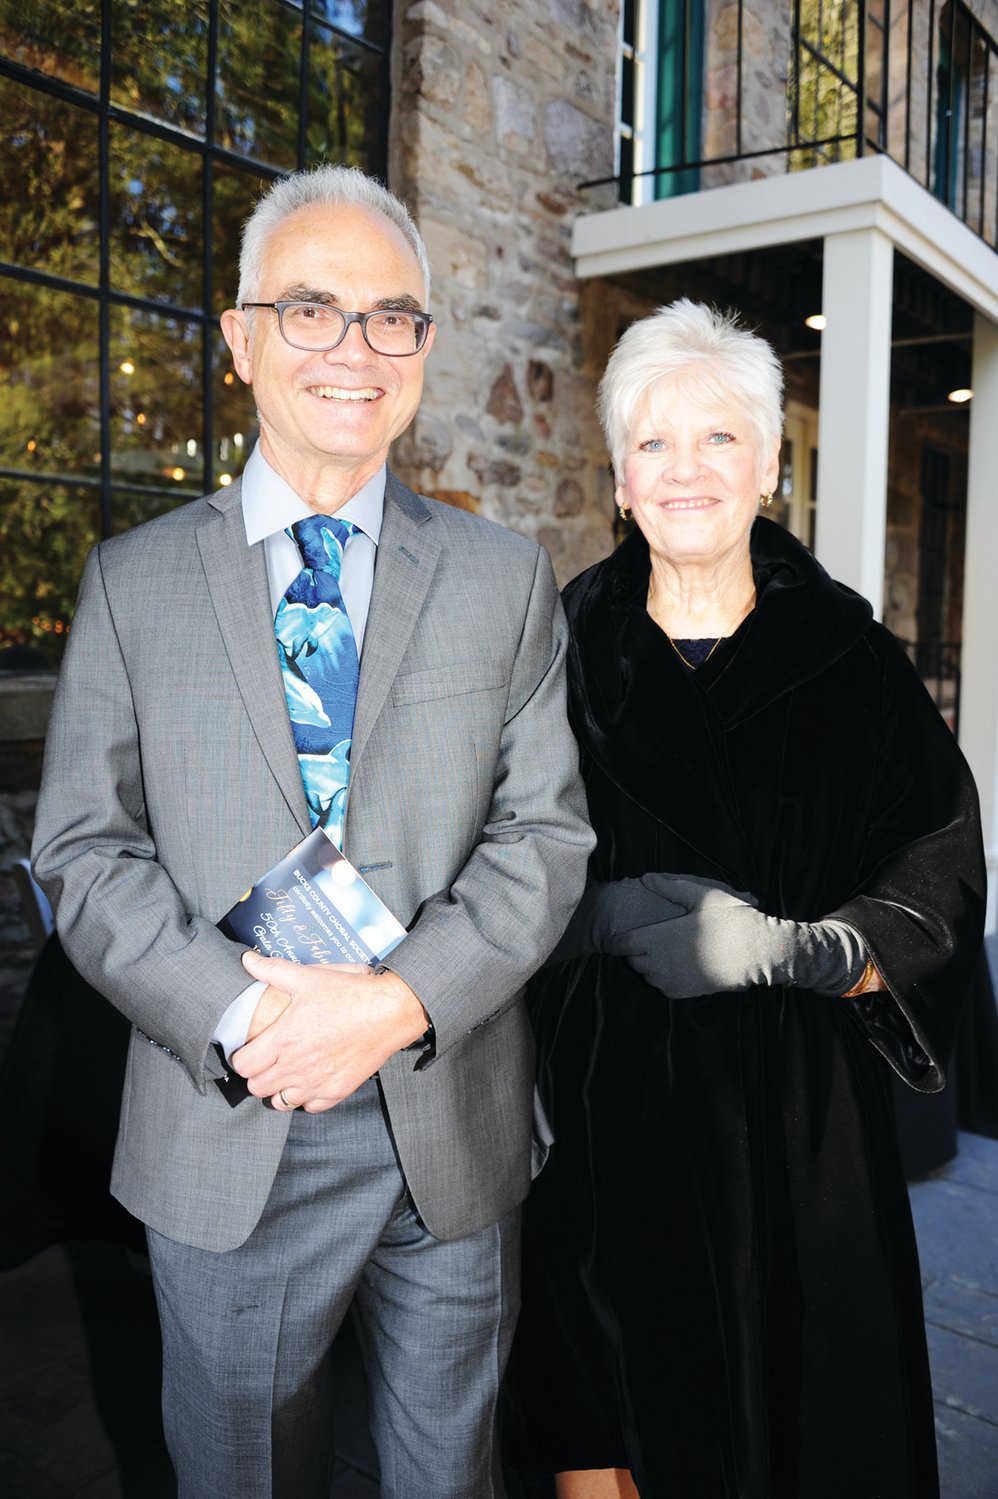 John Humphreys and Susan Johnson greet guests as they arrive at HollyHedge Estate in Solebury for the Bucks County Choral Society’s 50th anniversary gala. Johnson is the society’s assistant conductor and soprano section leader.